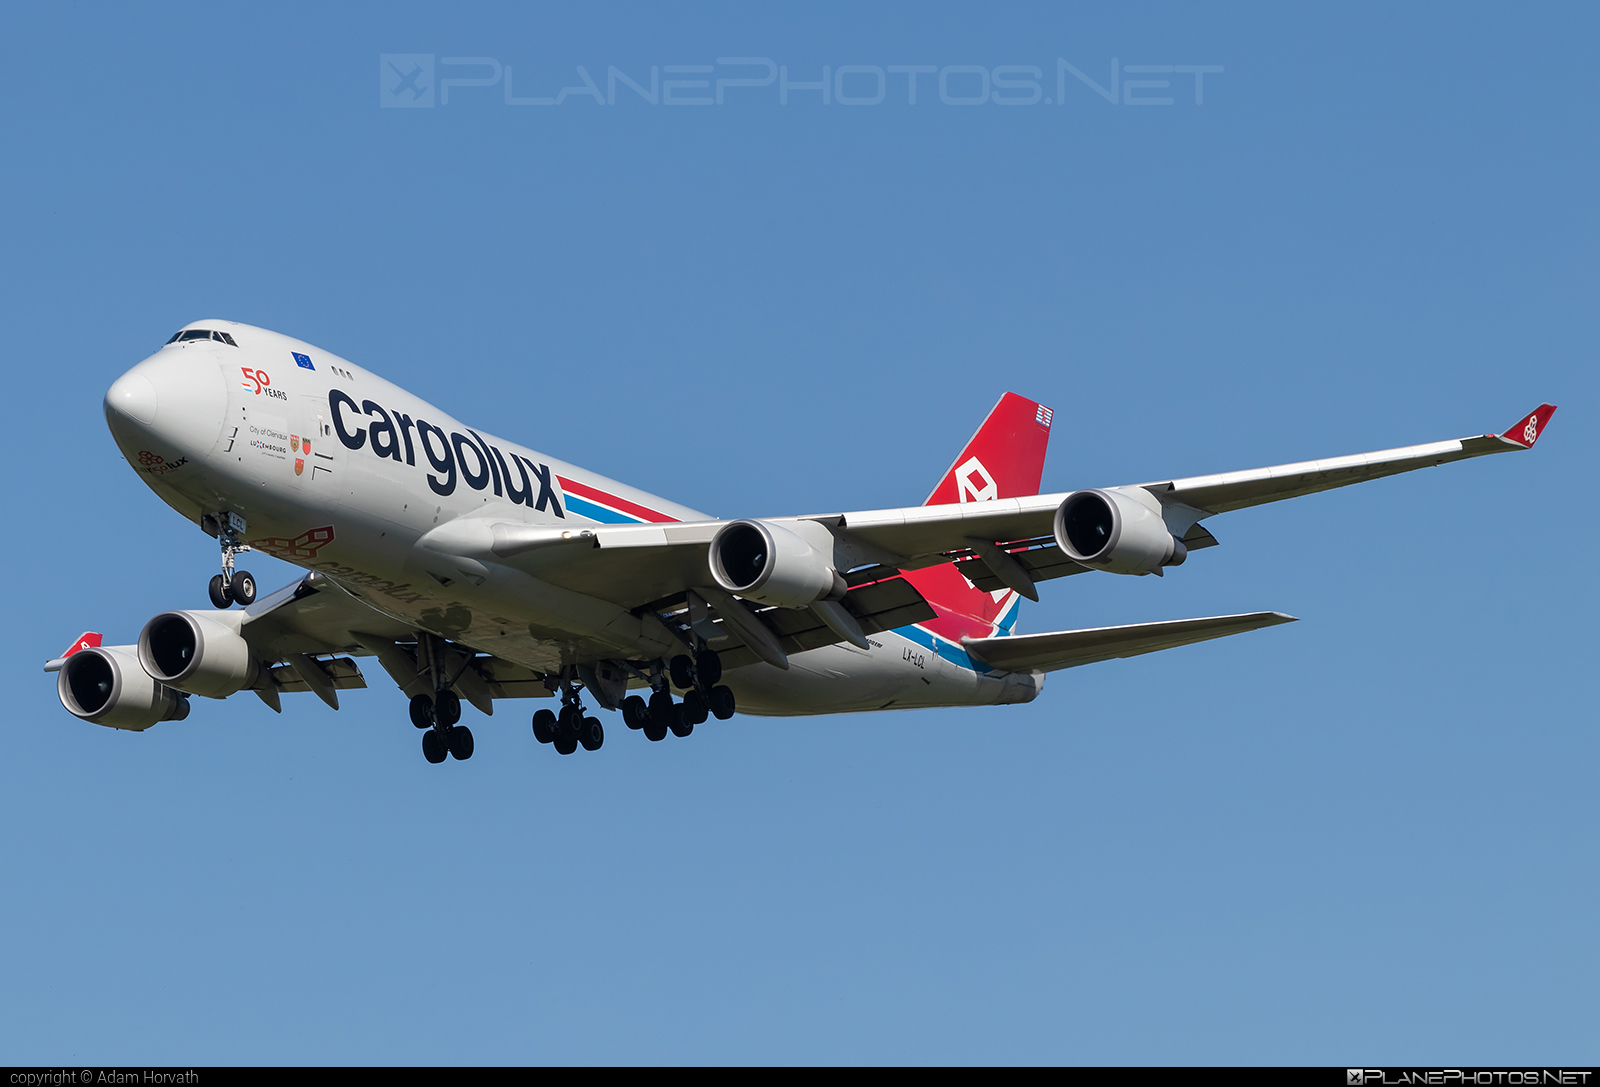 Boeing 747-400F - LX-LCL operated by Cargolux Airlines International #b747 #boeing #boeing747 #cargolux #jumbo